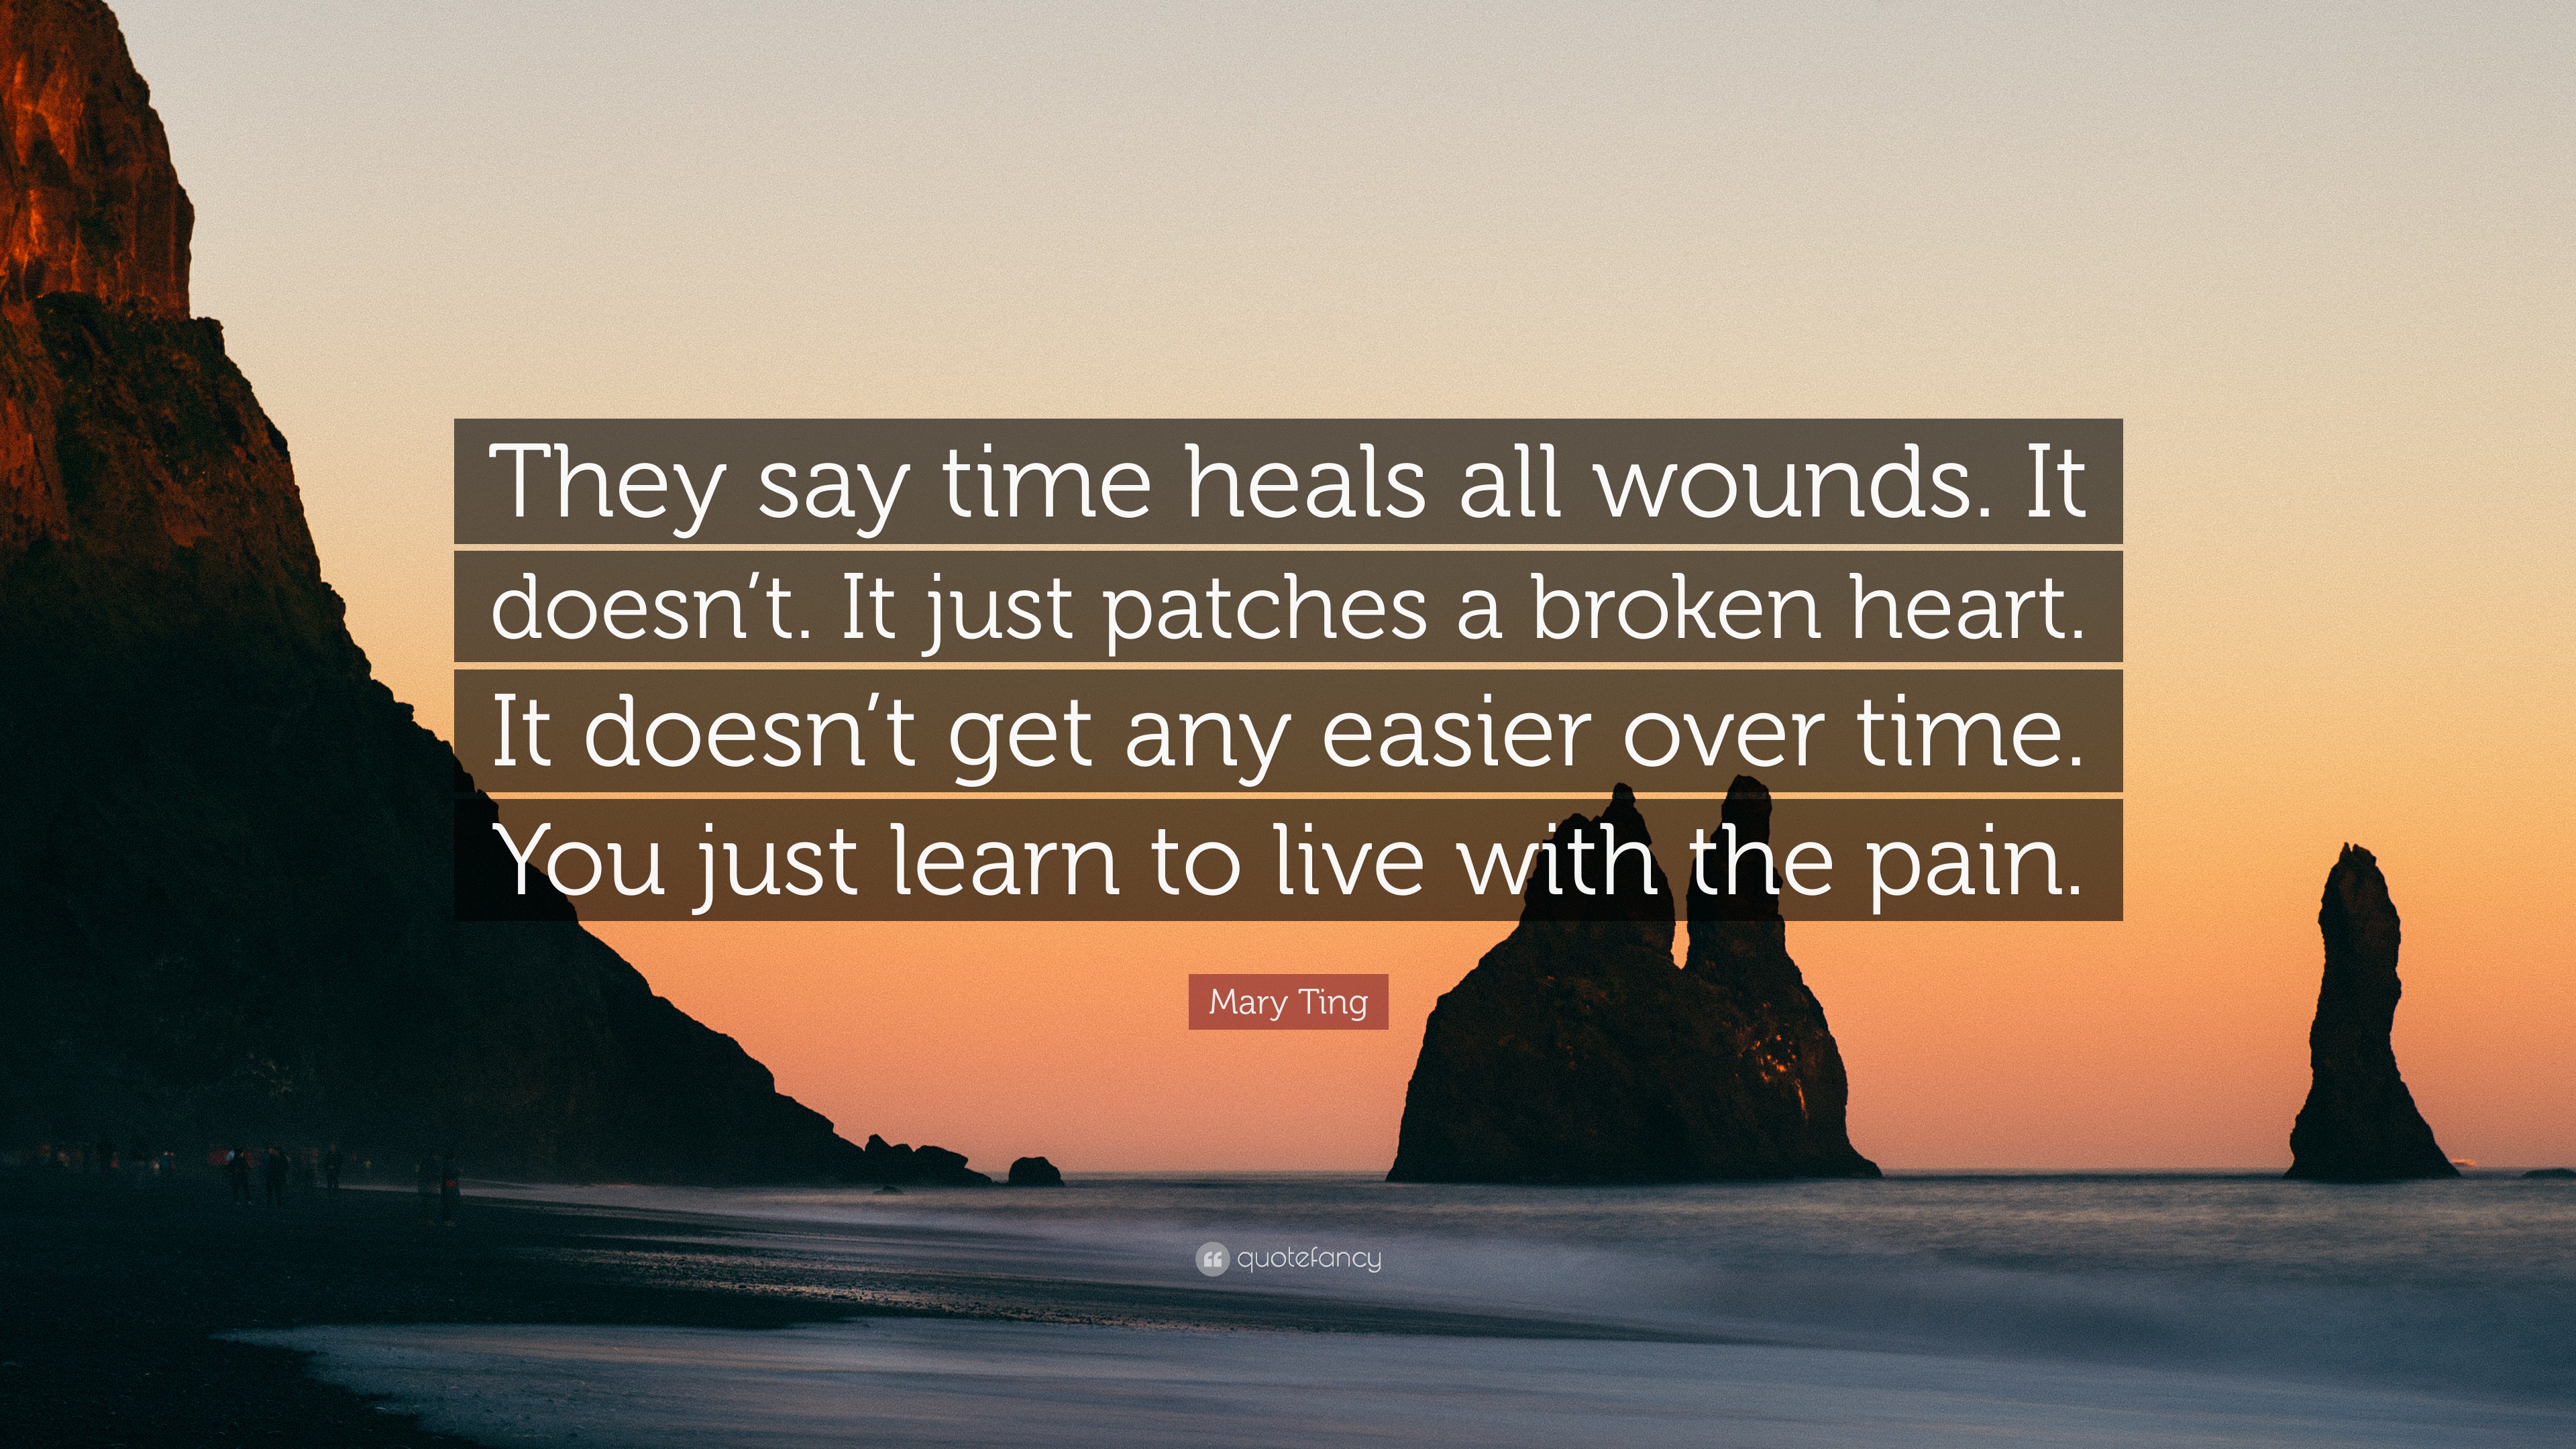 essay on time heals all wounds